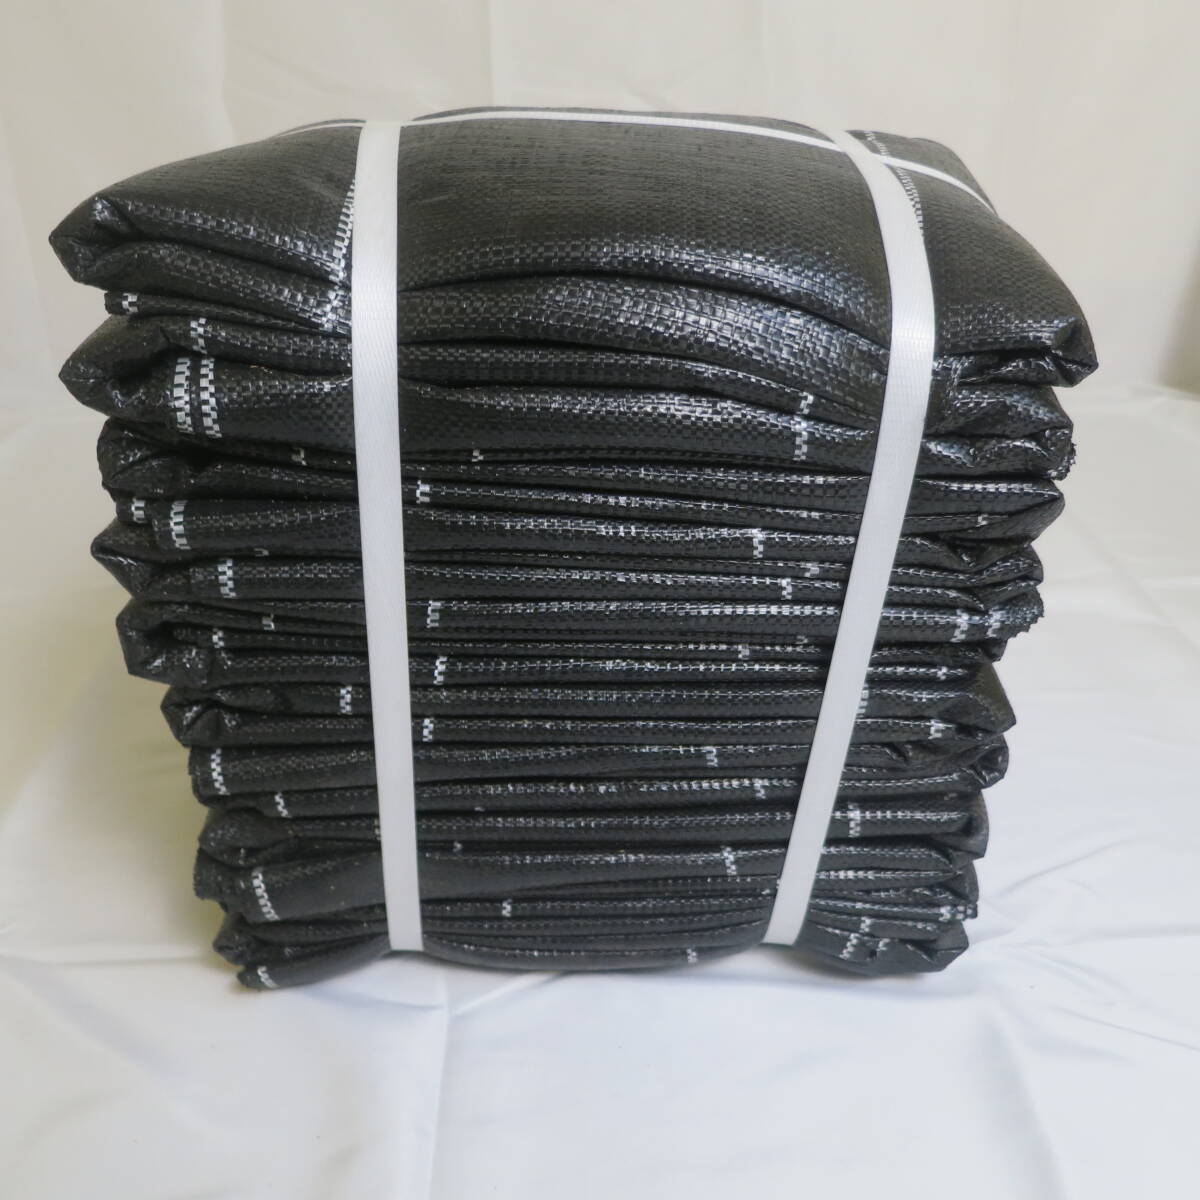  weed proofing seat 1m×10m 10ps.@ black color stock disposal goods nationwide free shipping 